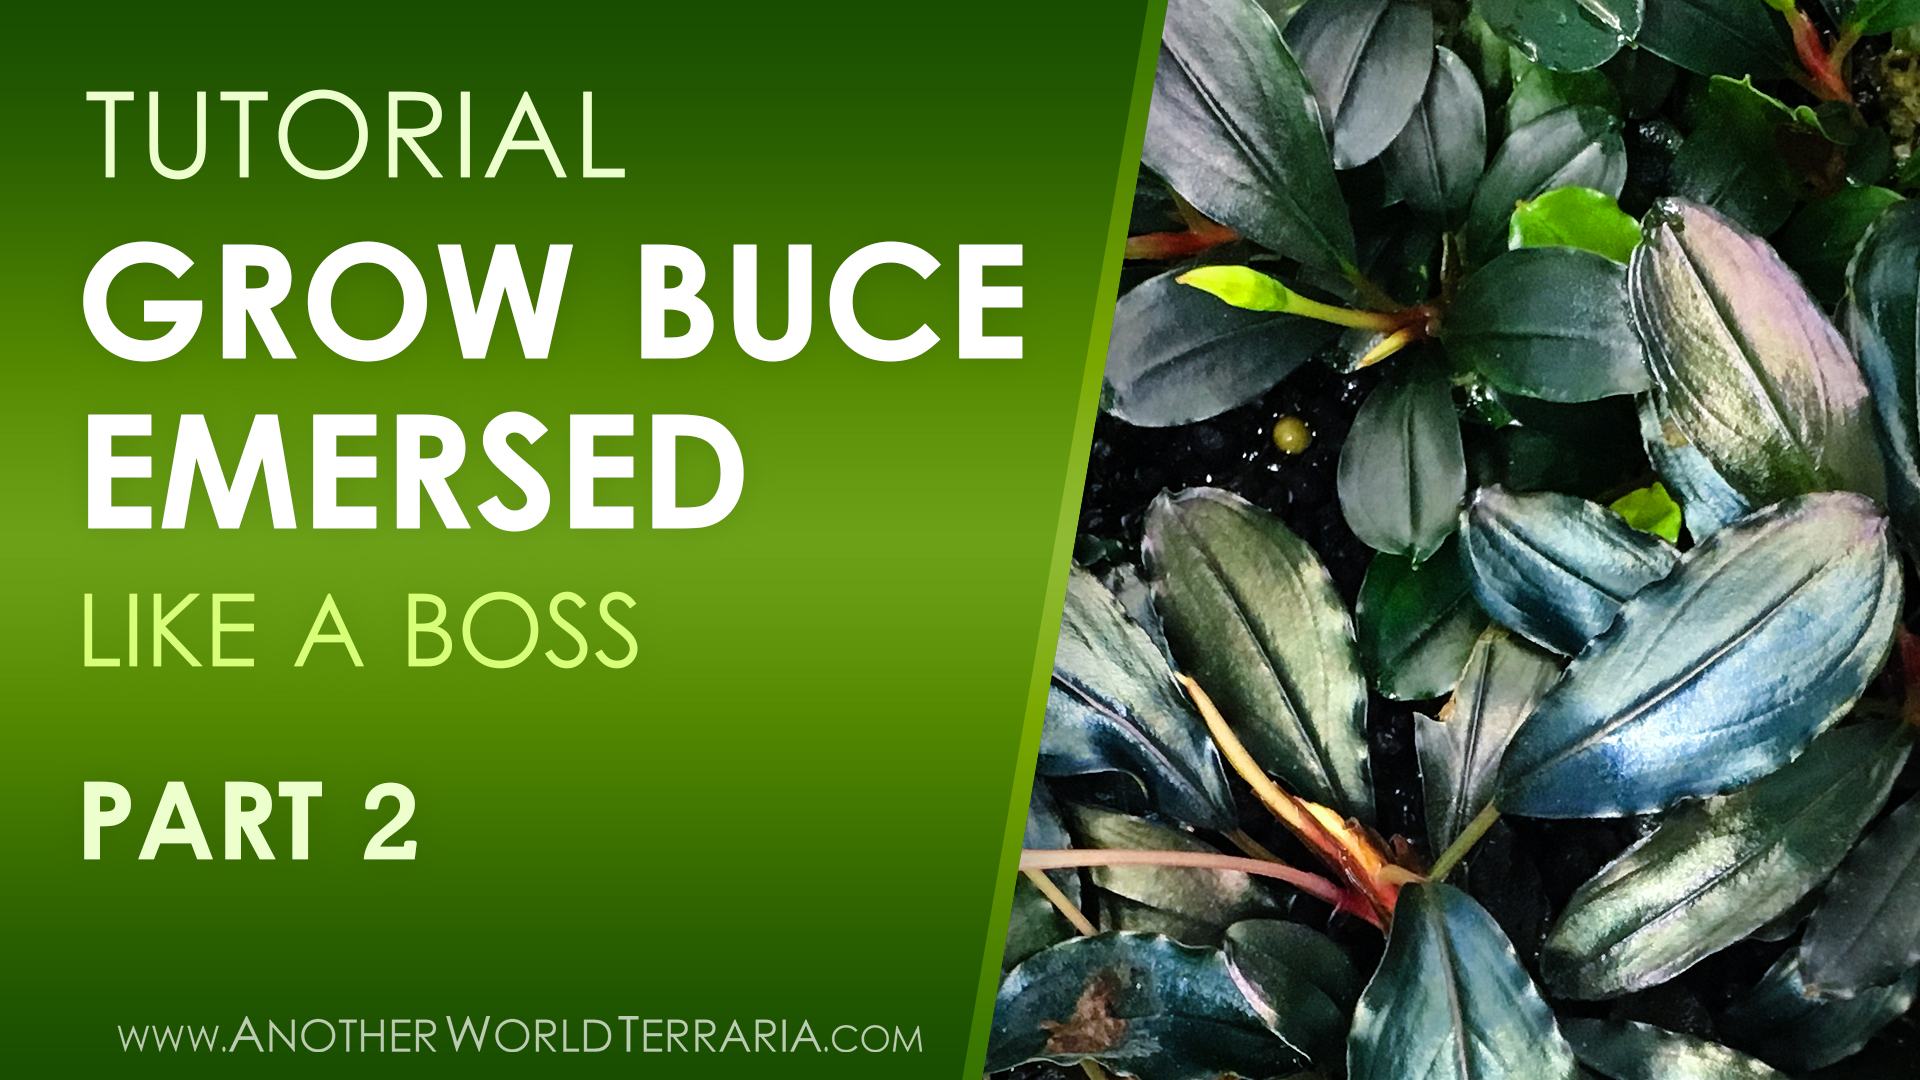 How to Grow Buce Emersed (Like a Boss) - Part 2